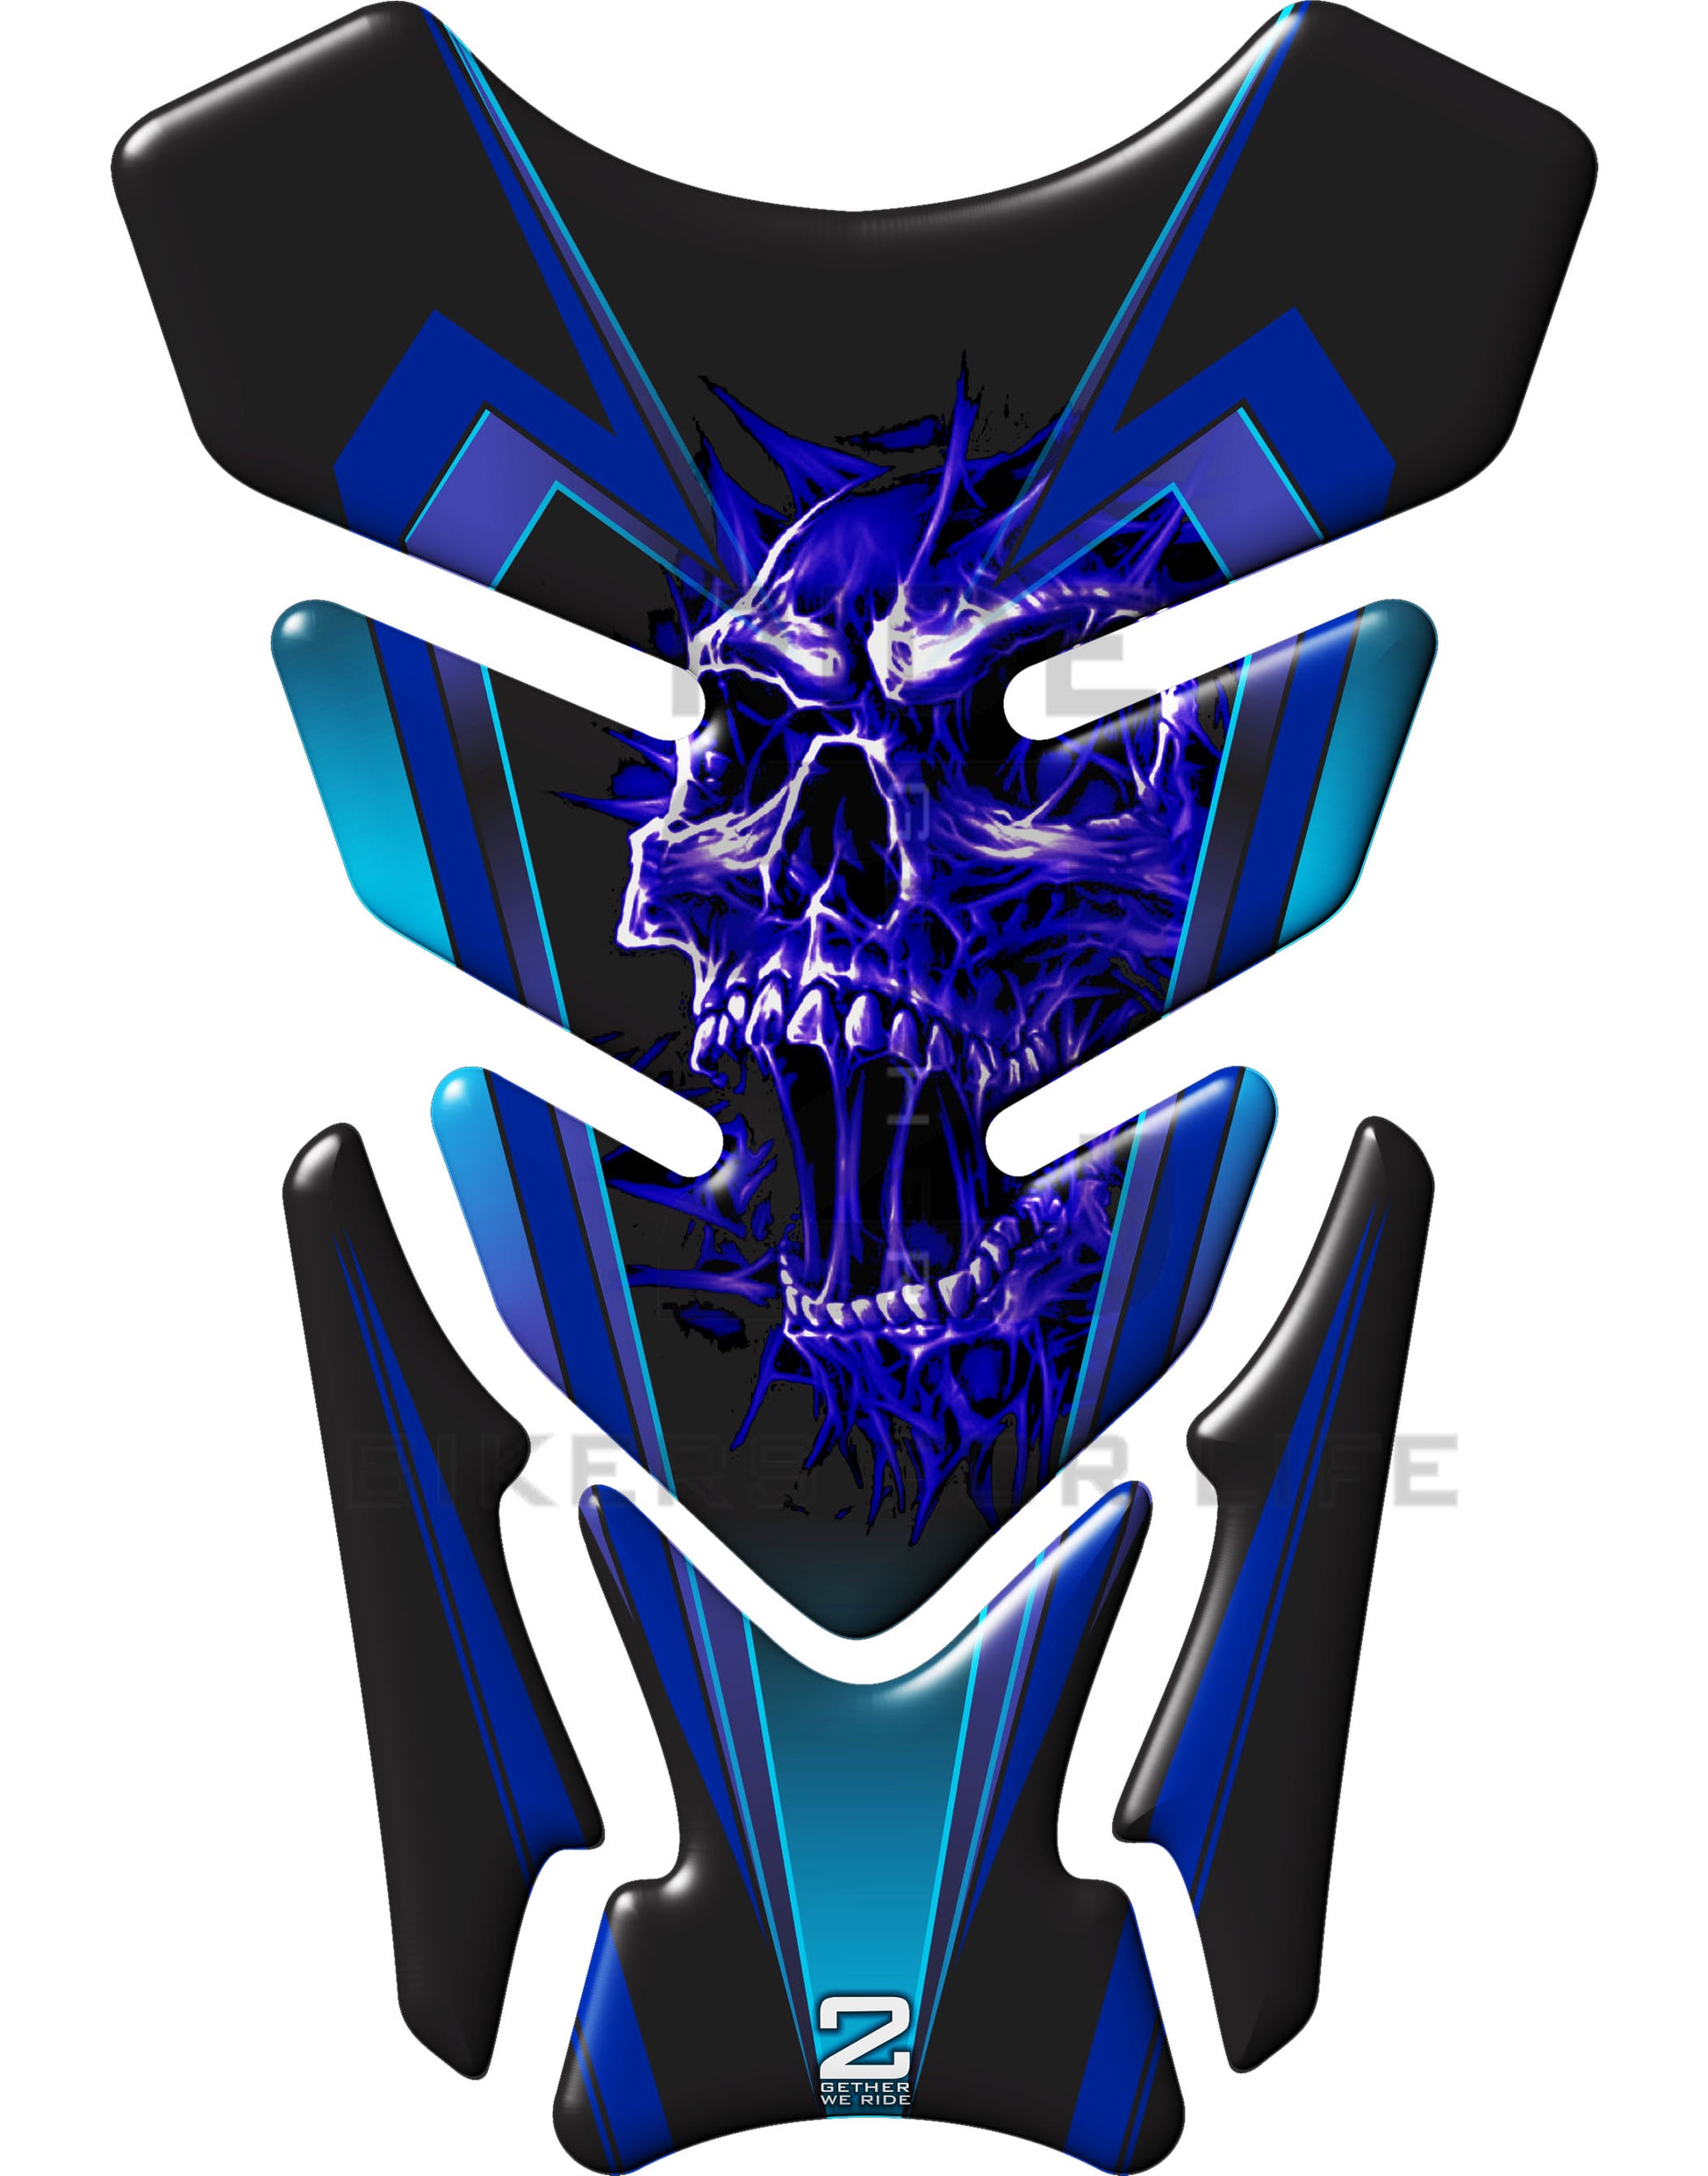 Universal Fit Blue Screaming Skull Motor Bike Tank Pad Protector. A Street Pad which fits most motorcycles.